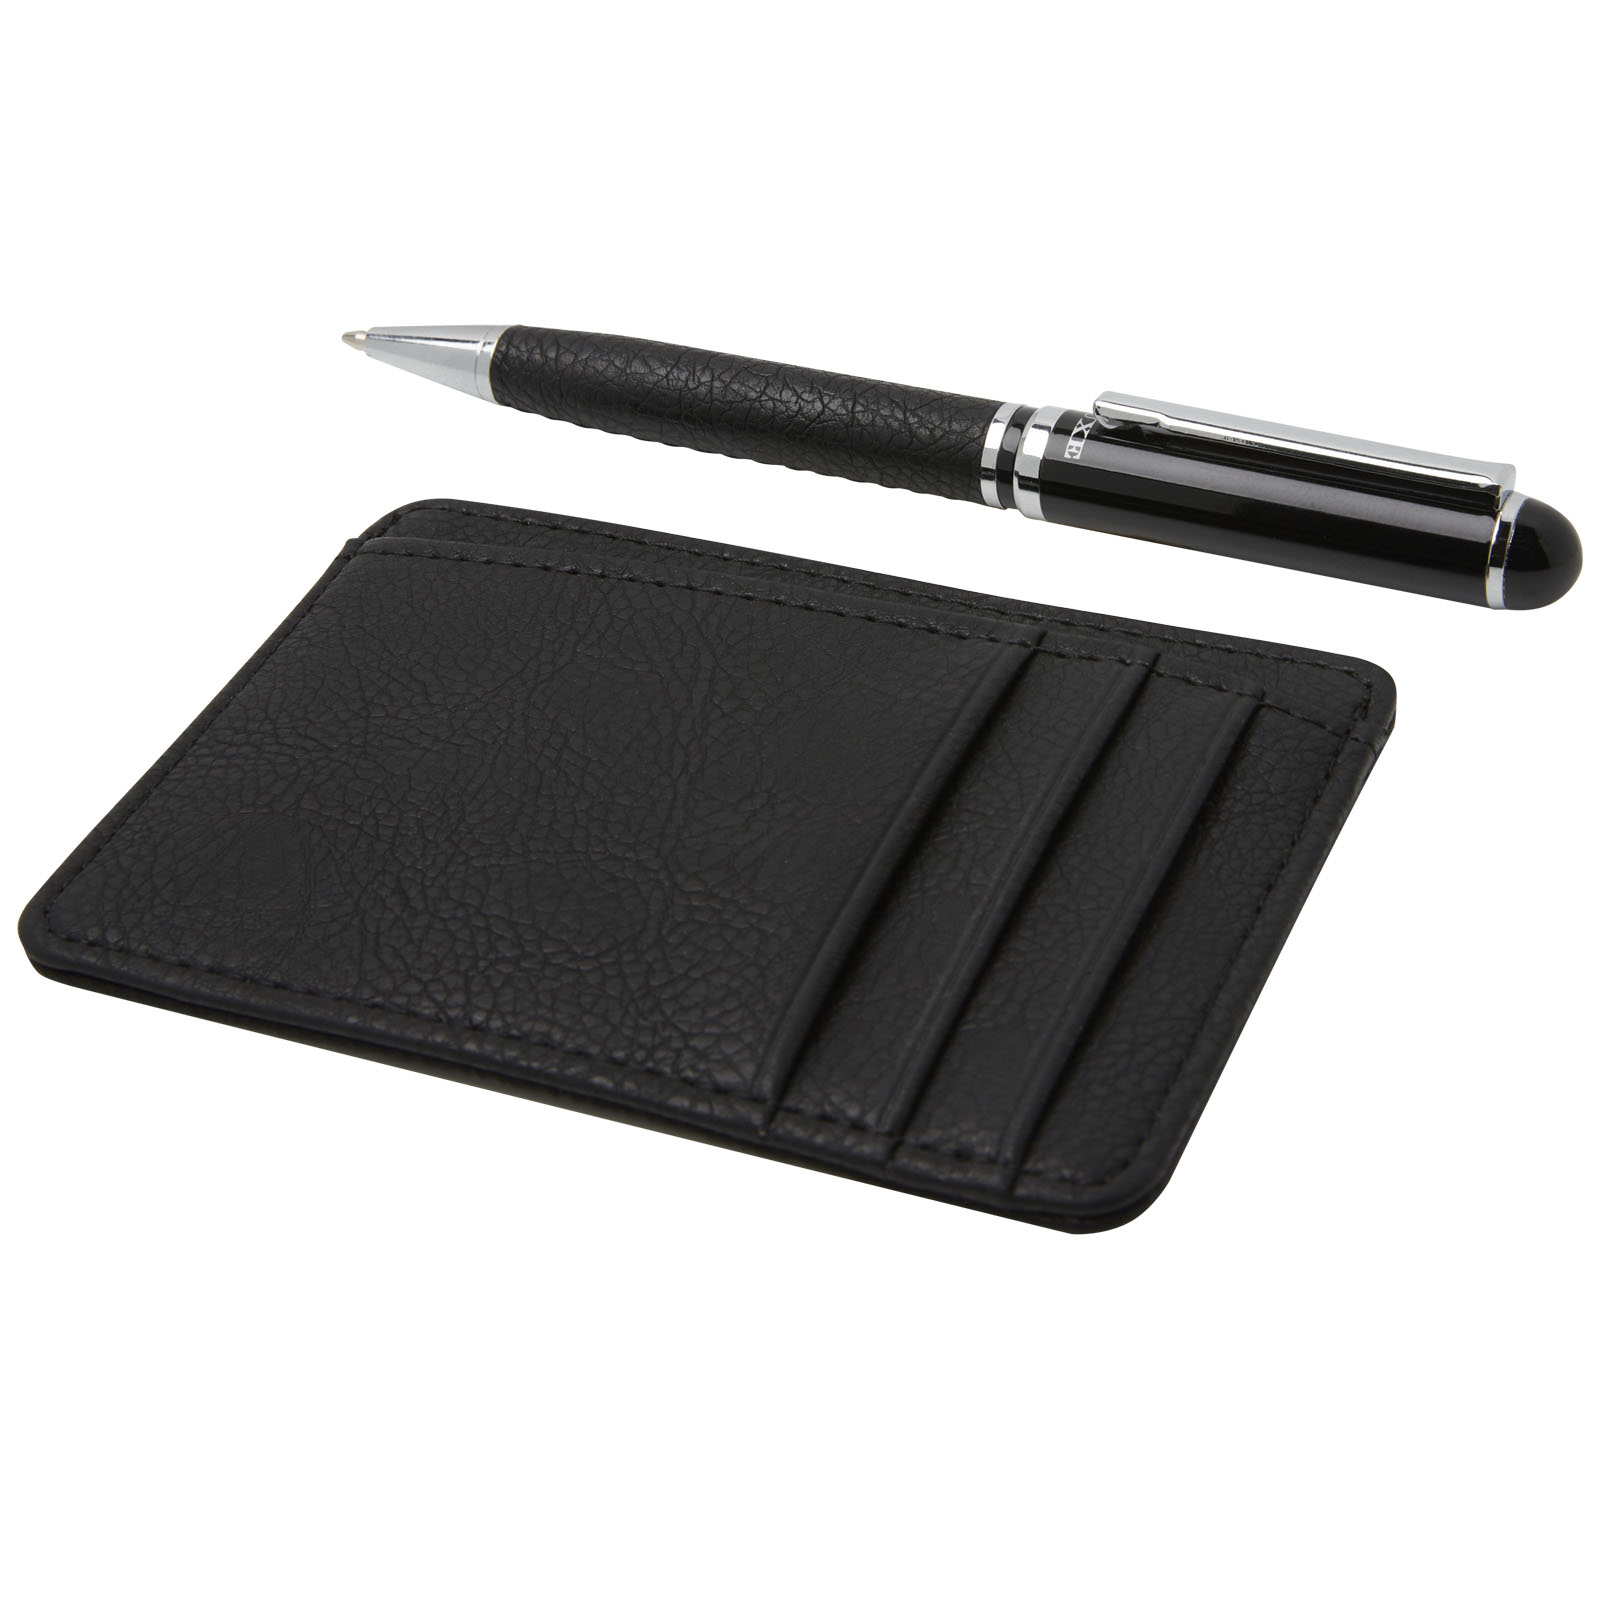 Advertising Gift sets - Encore ballpoint pen and wallet gift set - 4